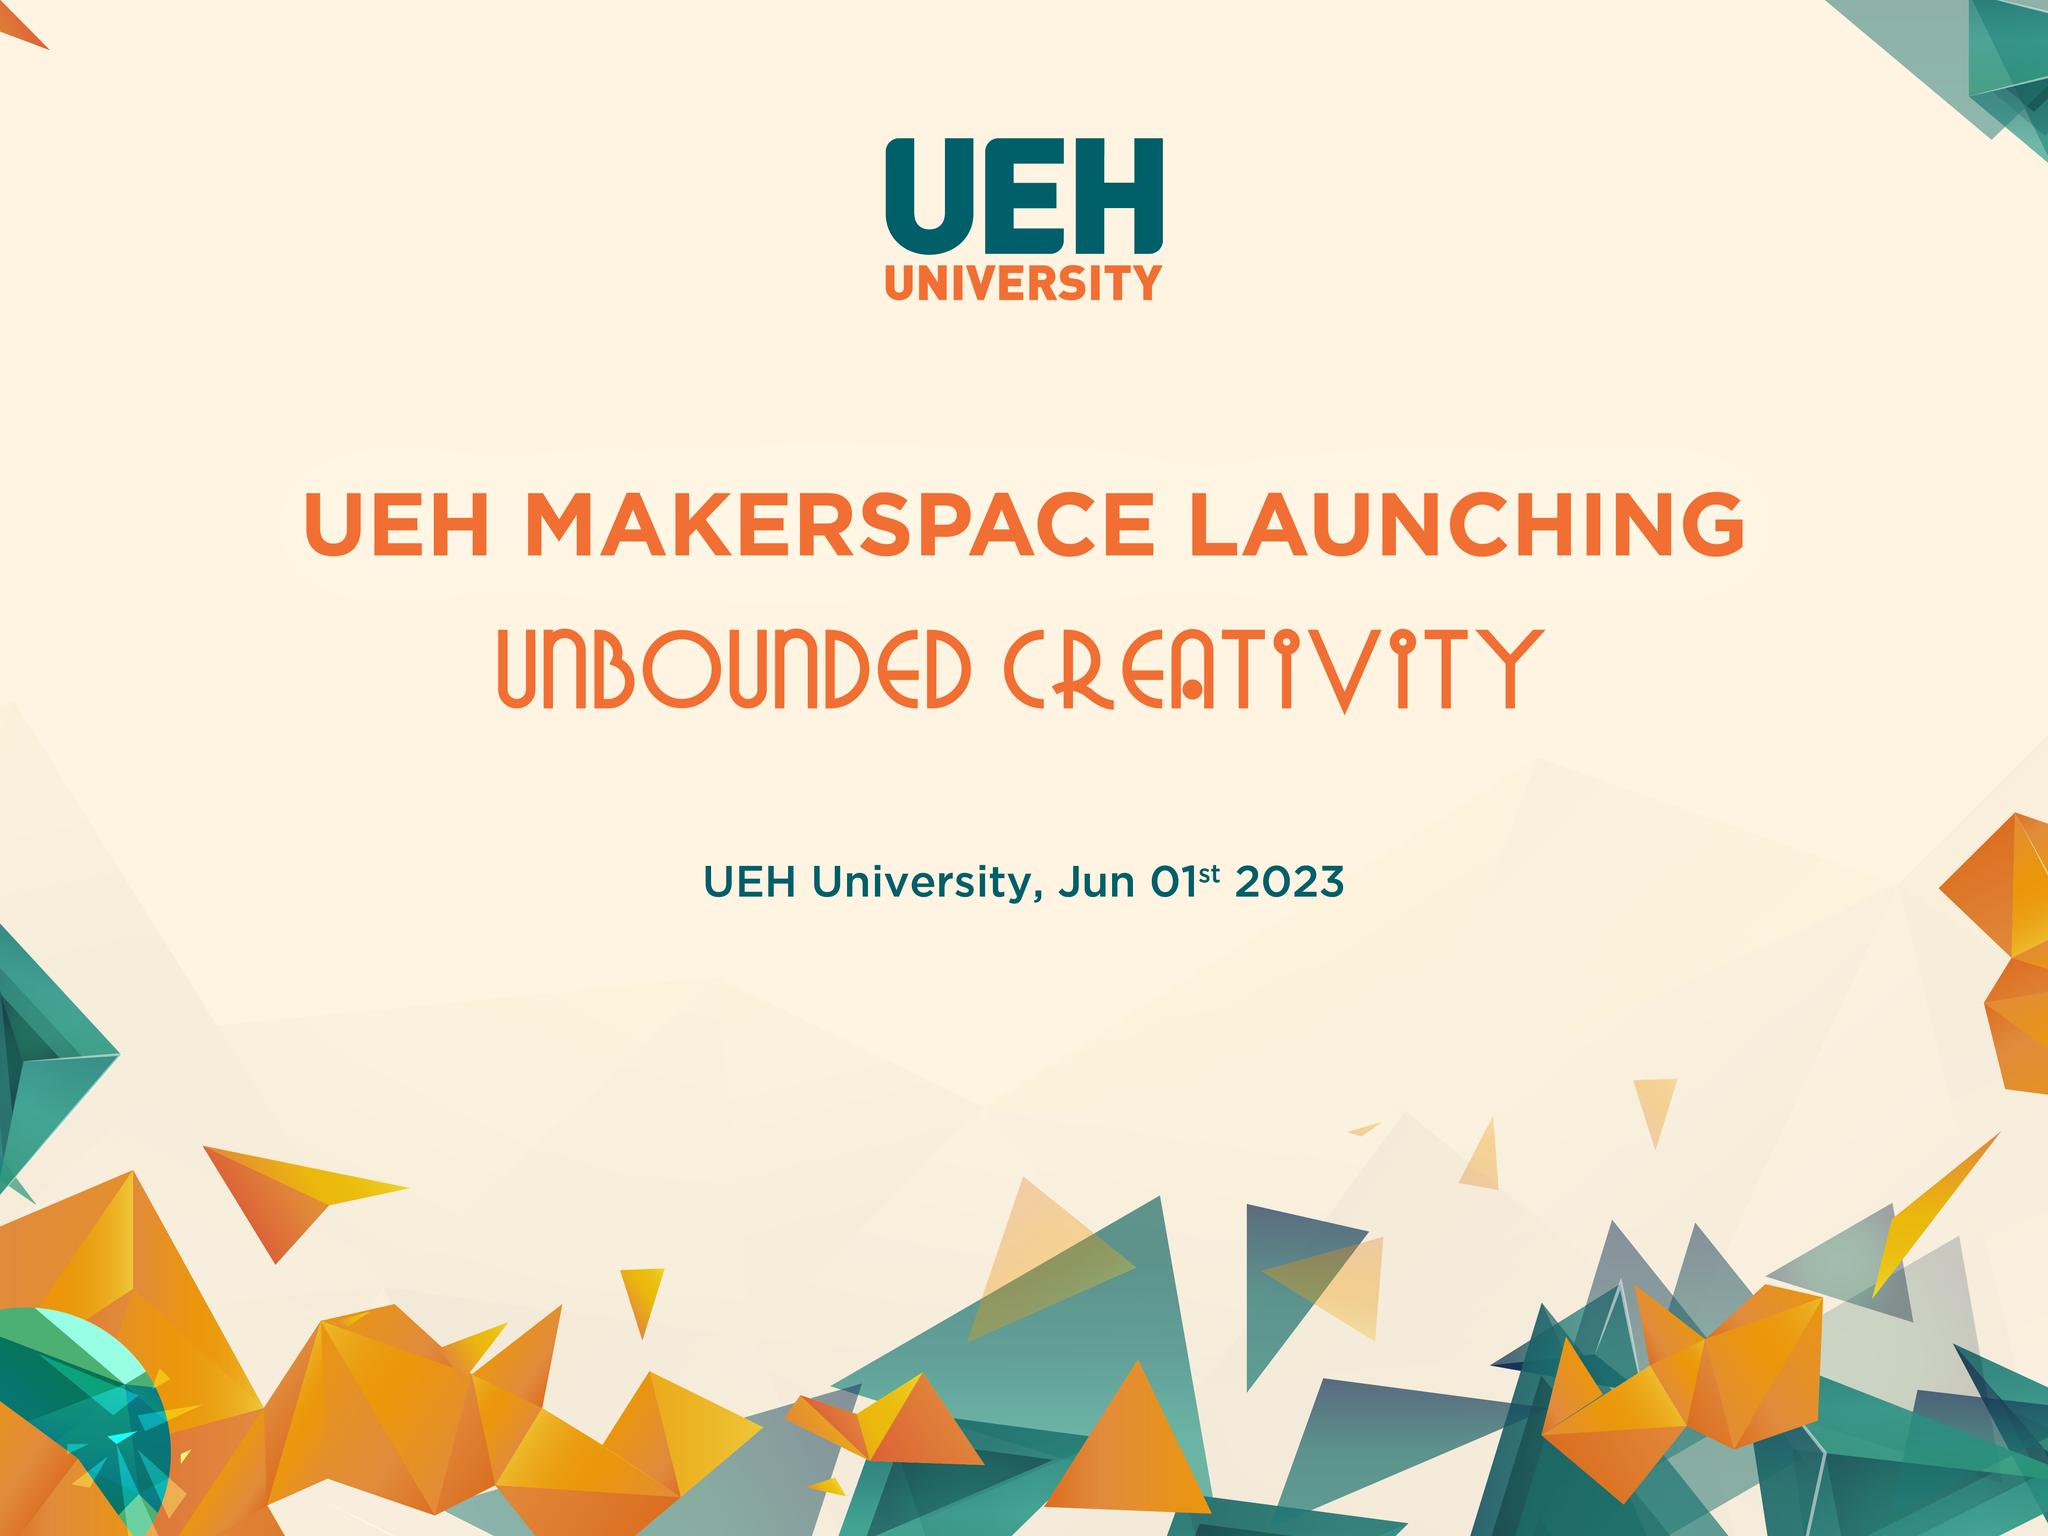 OPENING UEH MAKERSPACE SPACE AND OPENING APPLICATION FOR WOOD LAMP WORKSHOP - THE MAKERS' LAMP